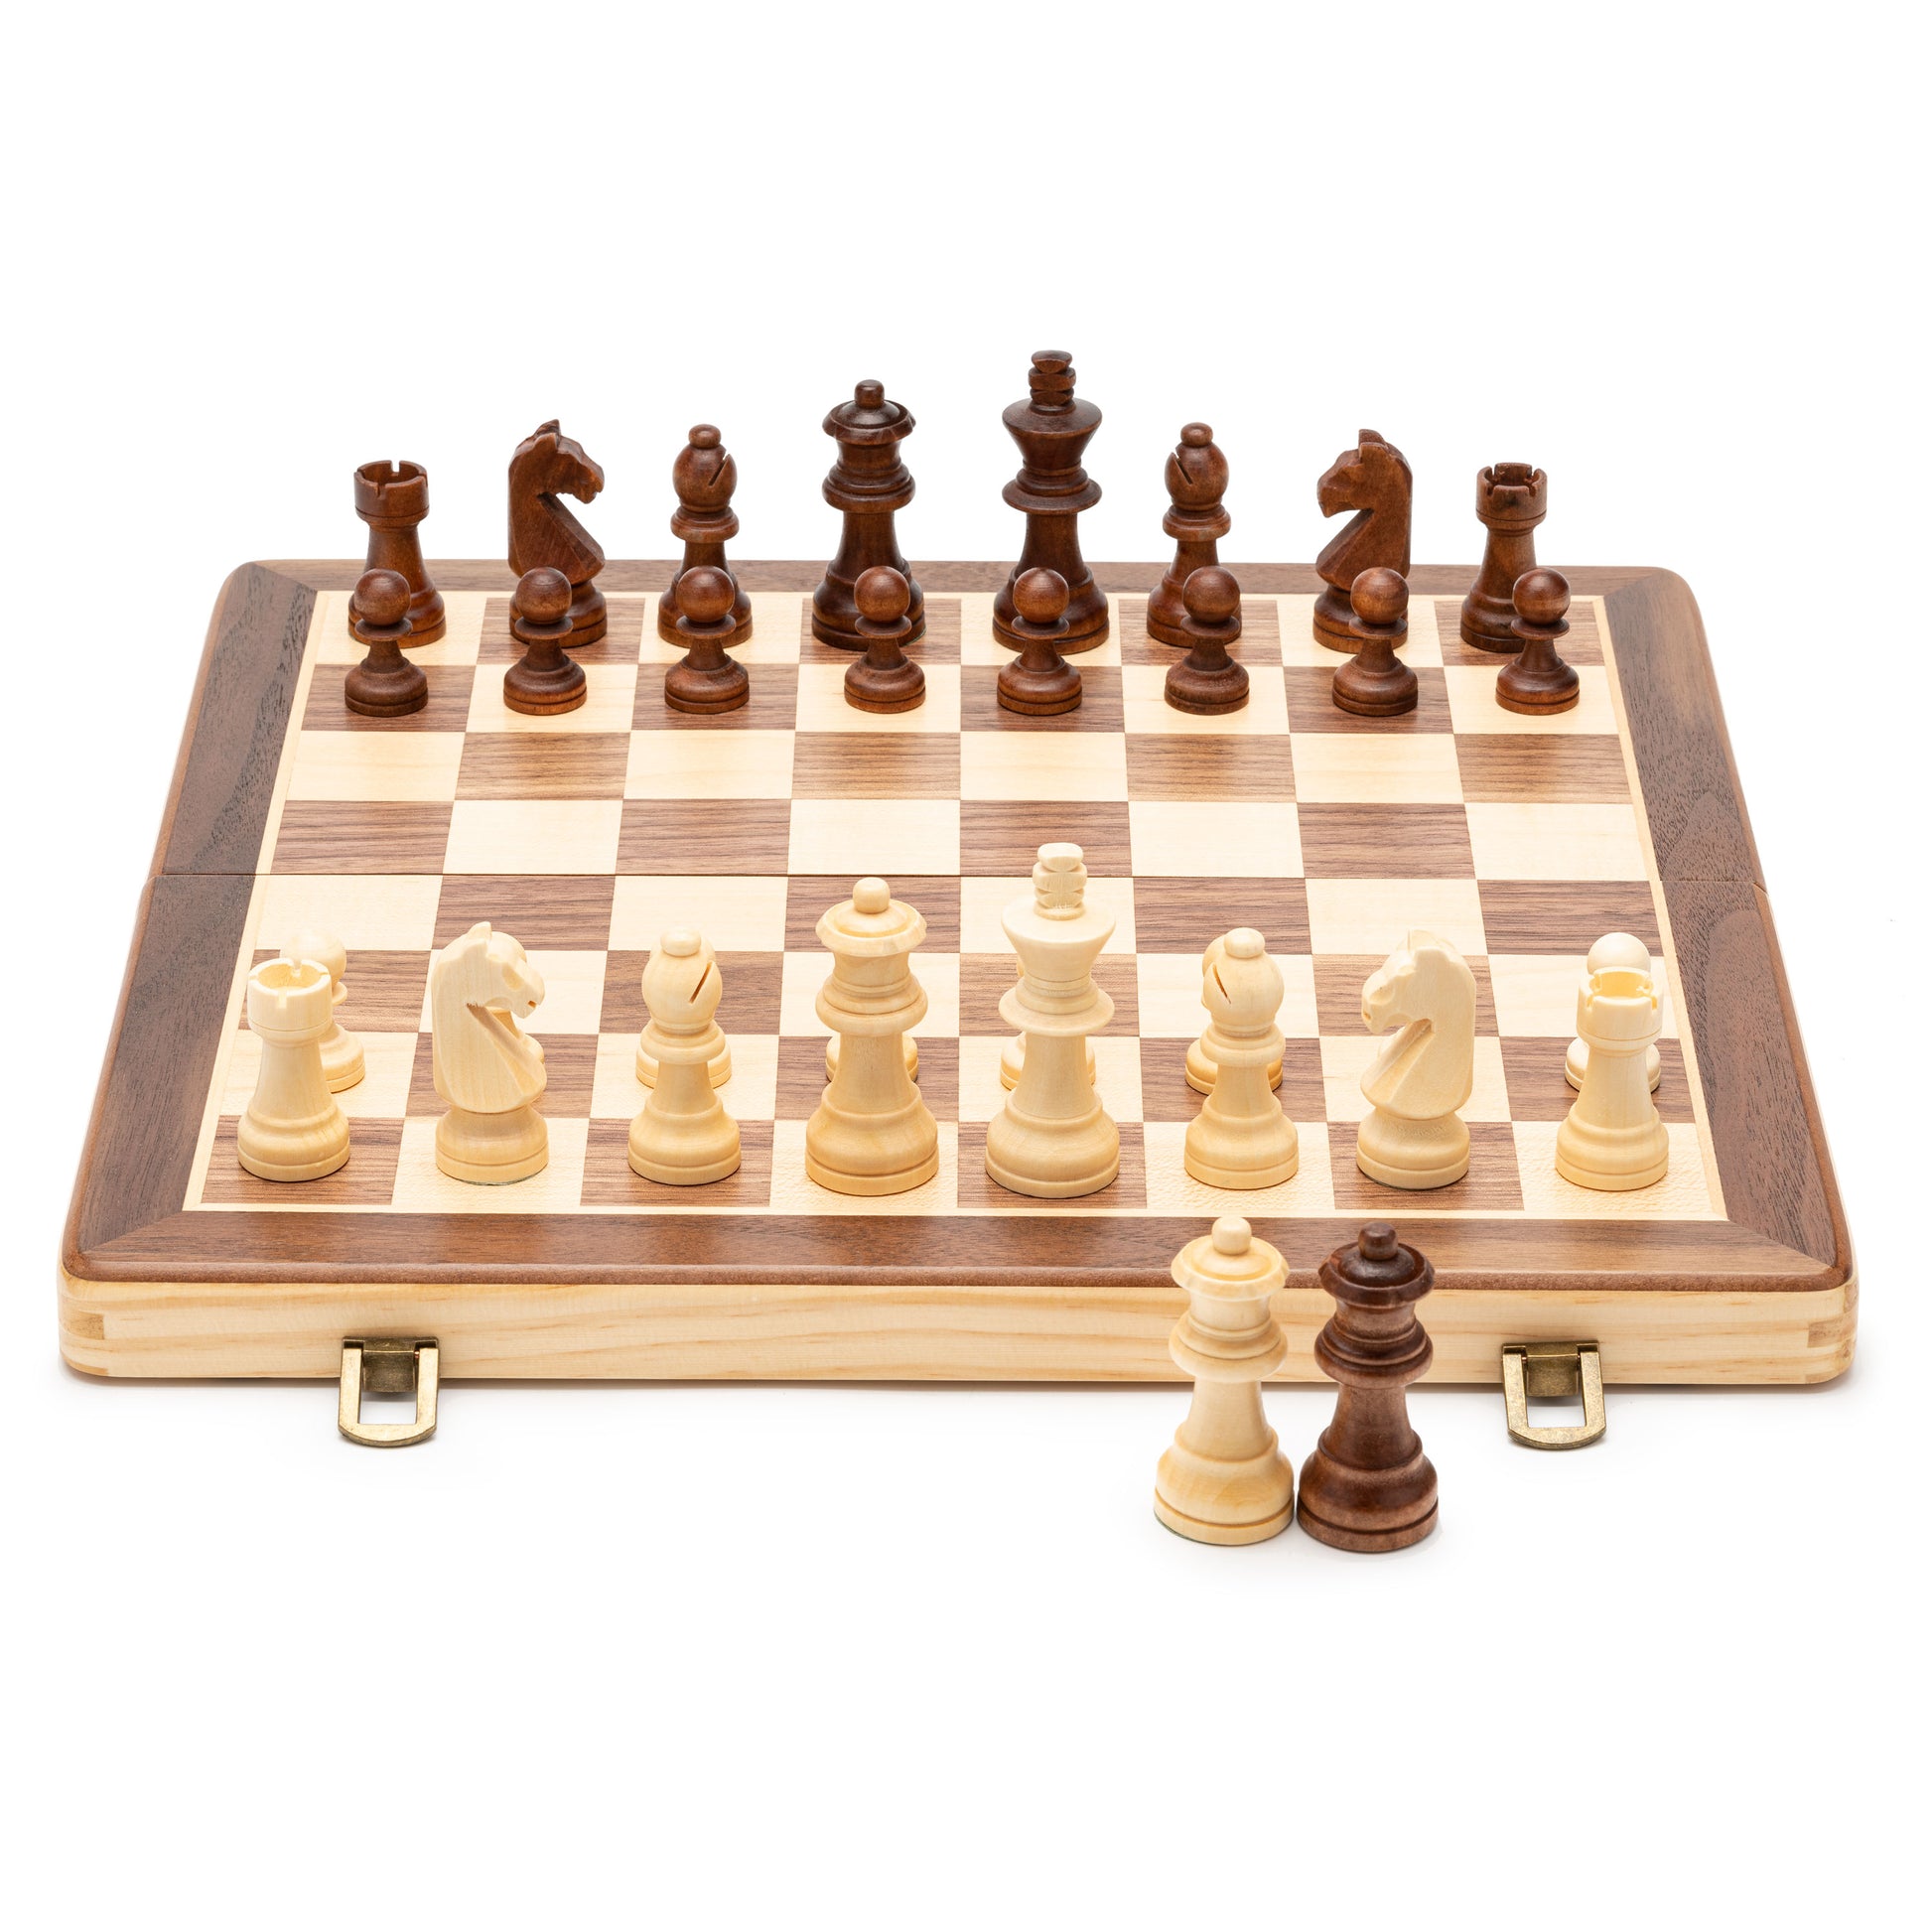  A&A 15 Magnetic Wooden Chess Set/Folding Board / 3 King  Height German Knight Staunton Chess Pieces/Mahogany & Maple Inlaid /2 Extra  Queen : Toys & Games